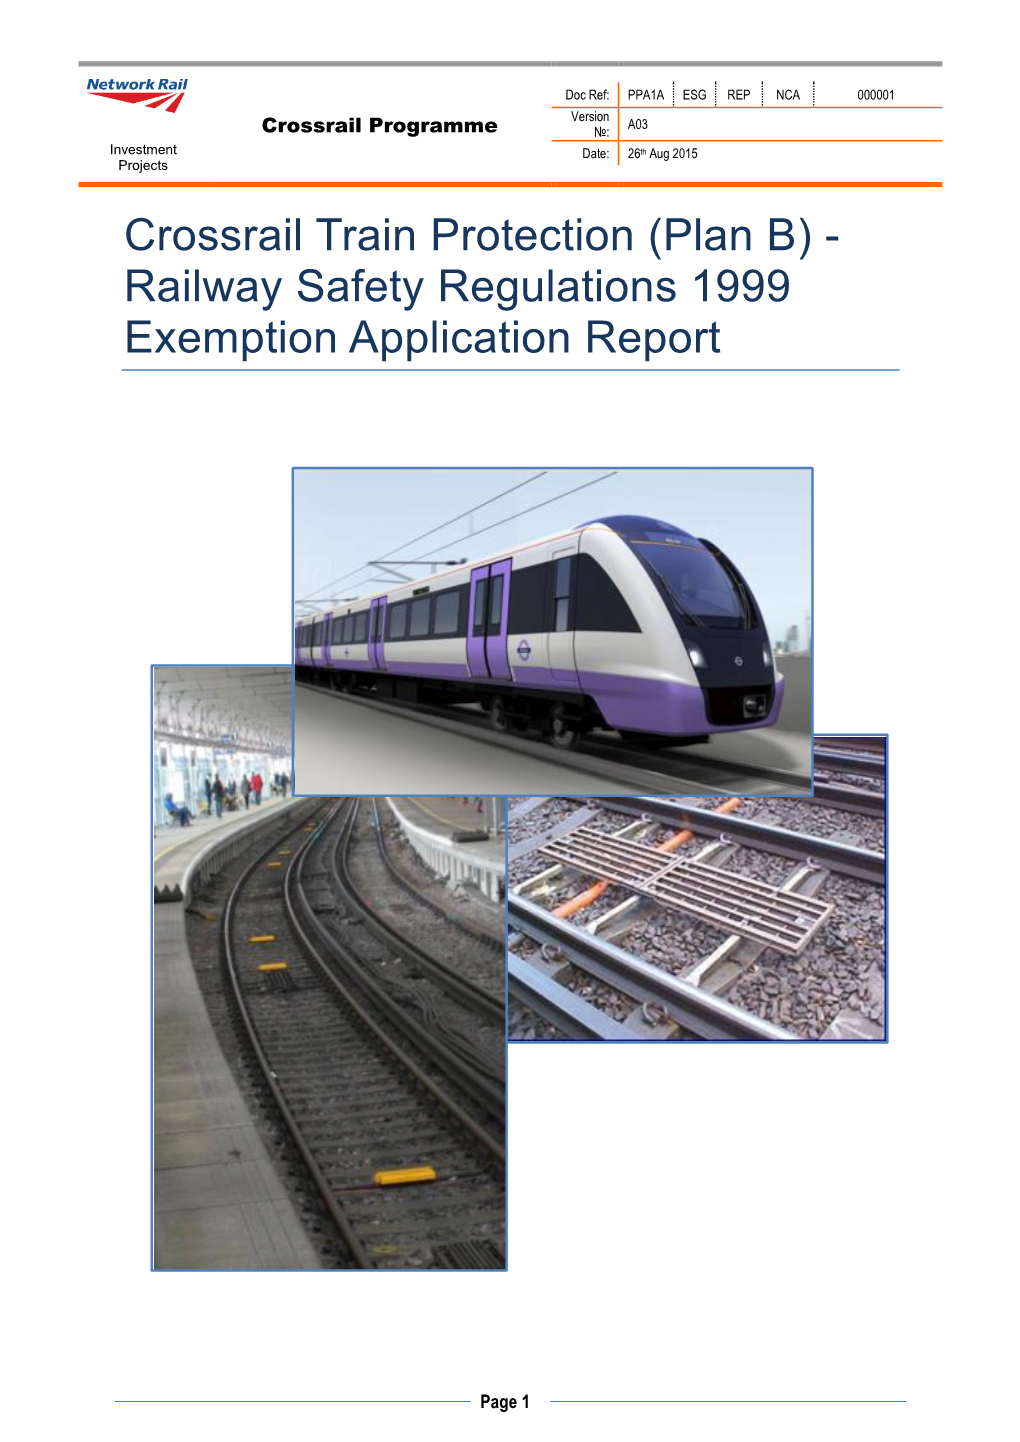 Crossrail Train Protection (Plan B) - Railway Safety Regulations 1999 Exemption Application Report